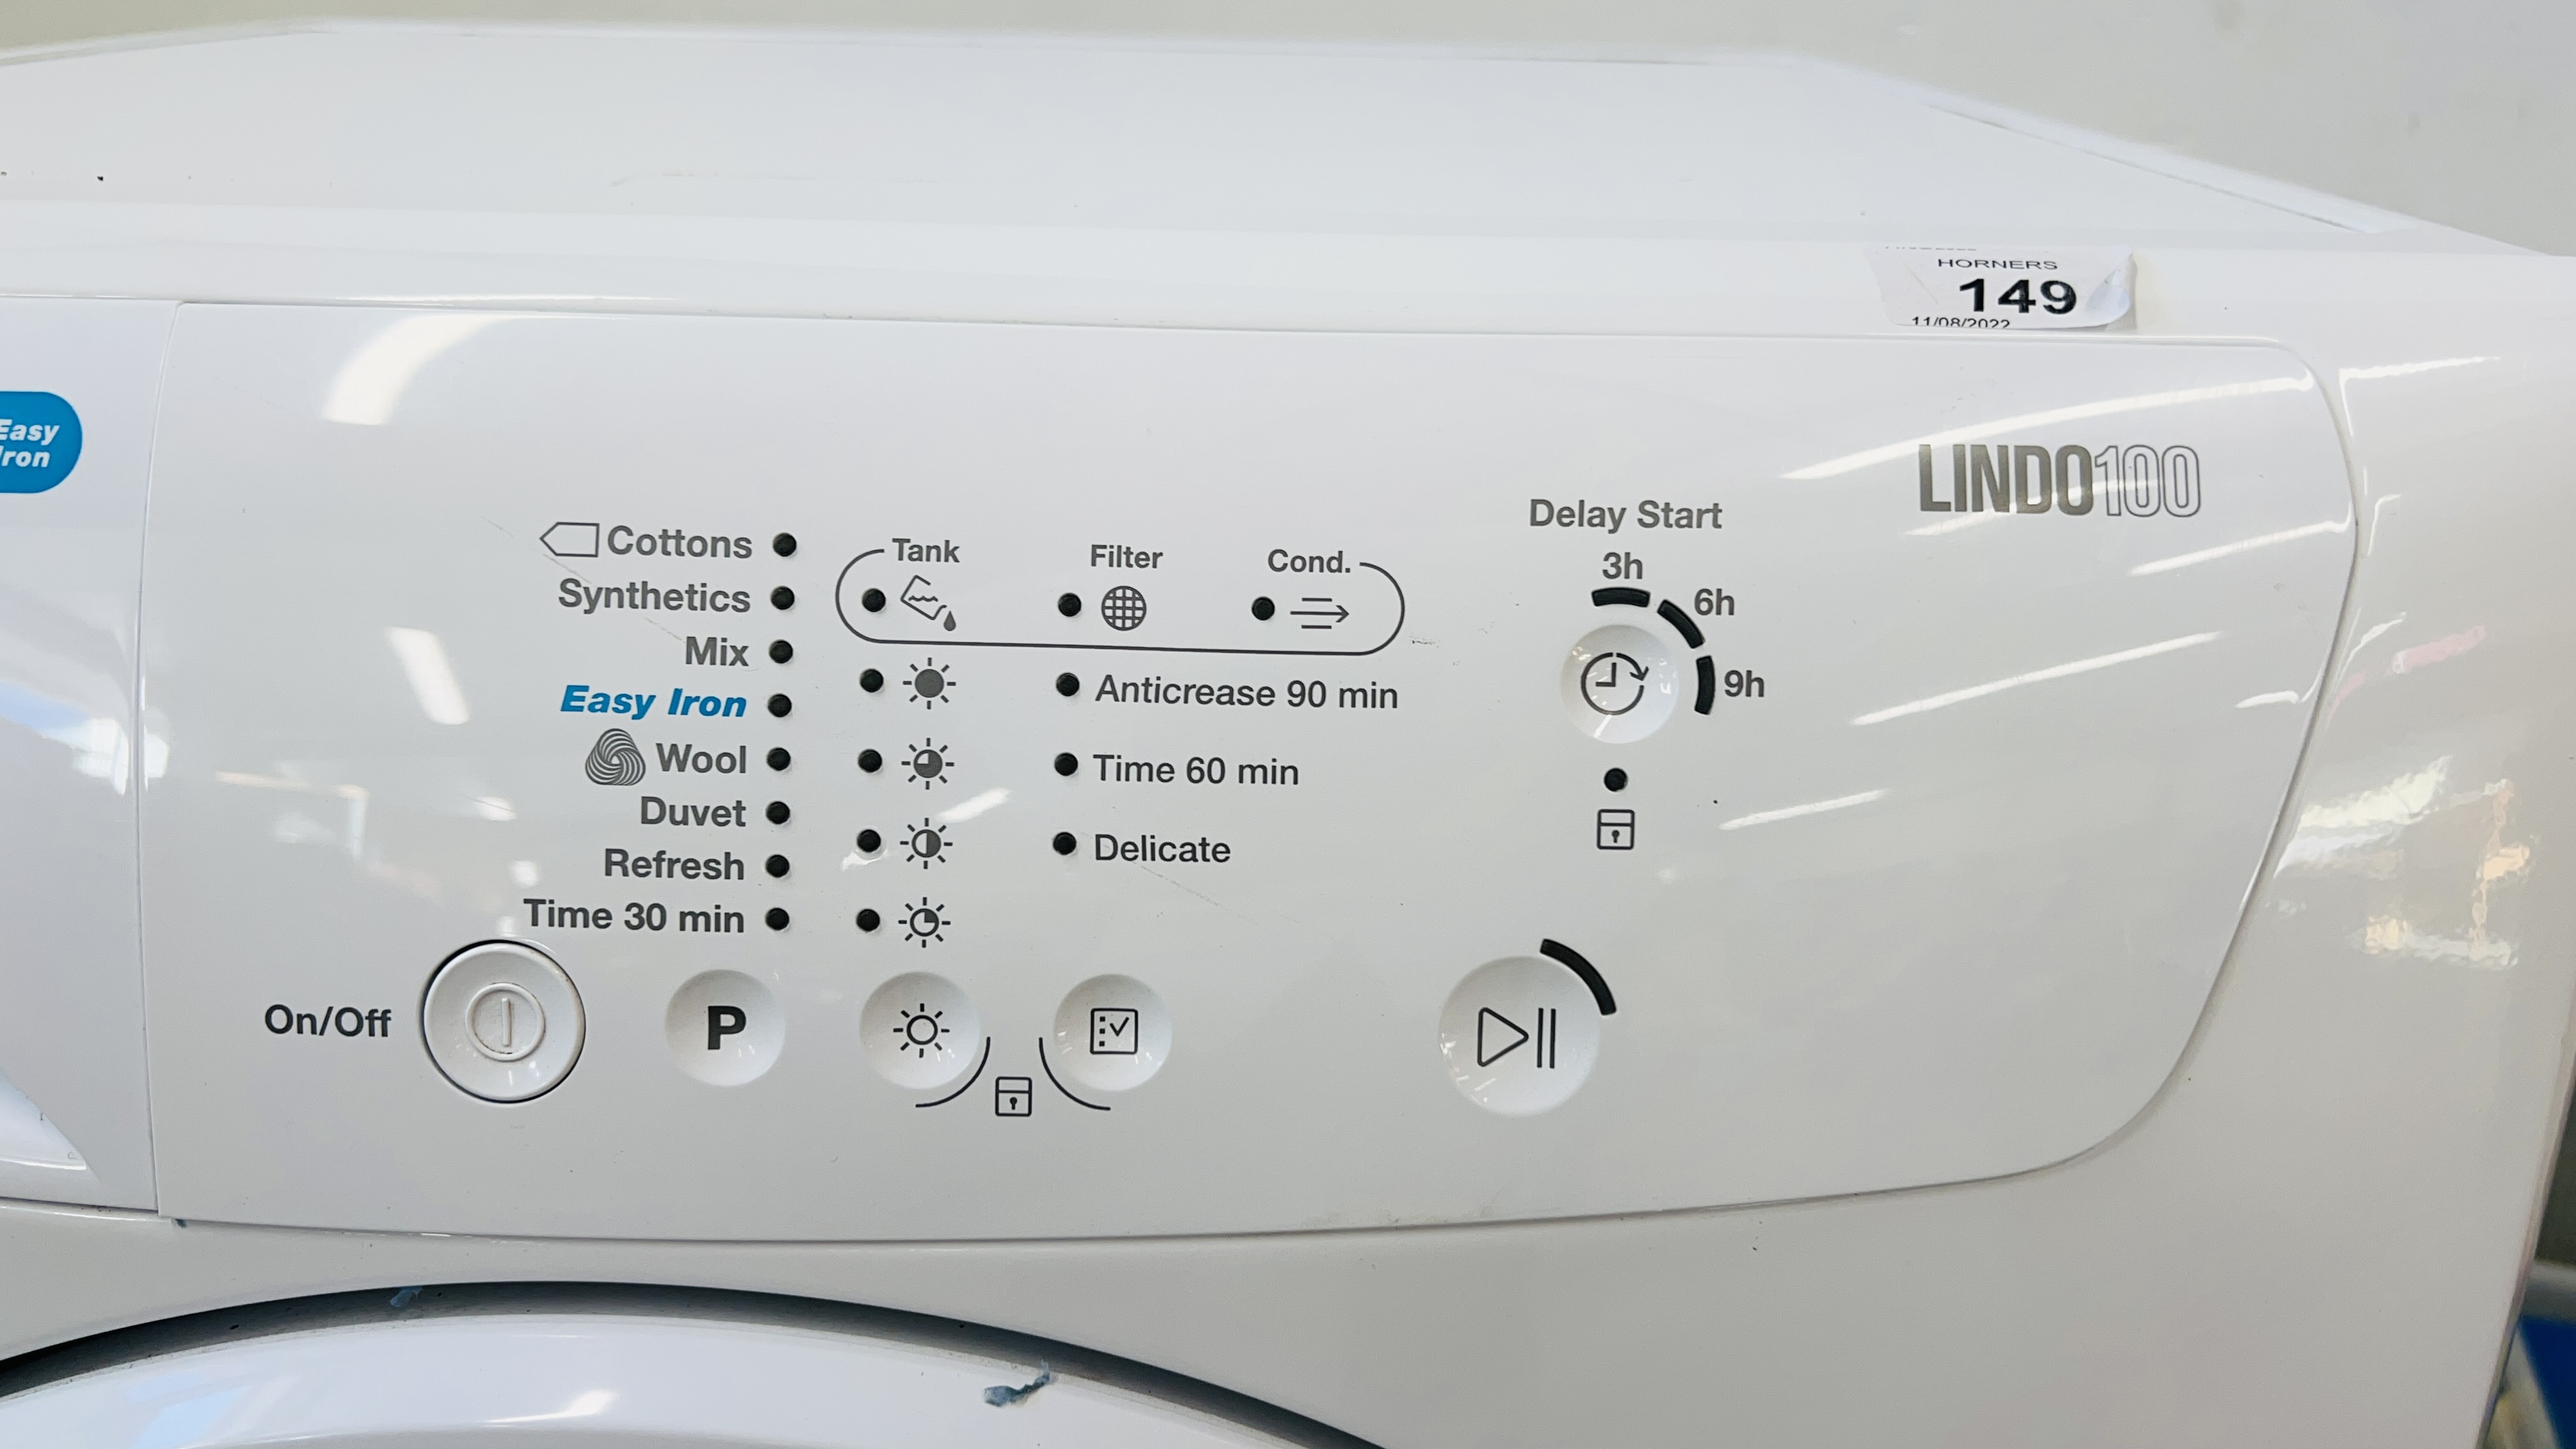 ZANUSSI LINDO 100 TUMBLE DRYER - SOLD AS SEEN. - Image 2 of 9